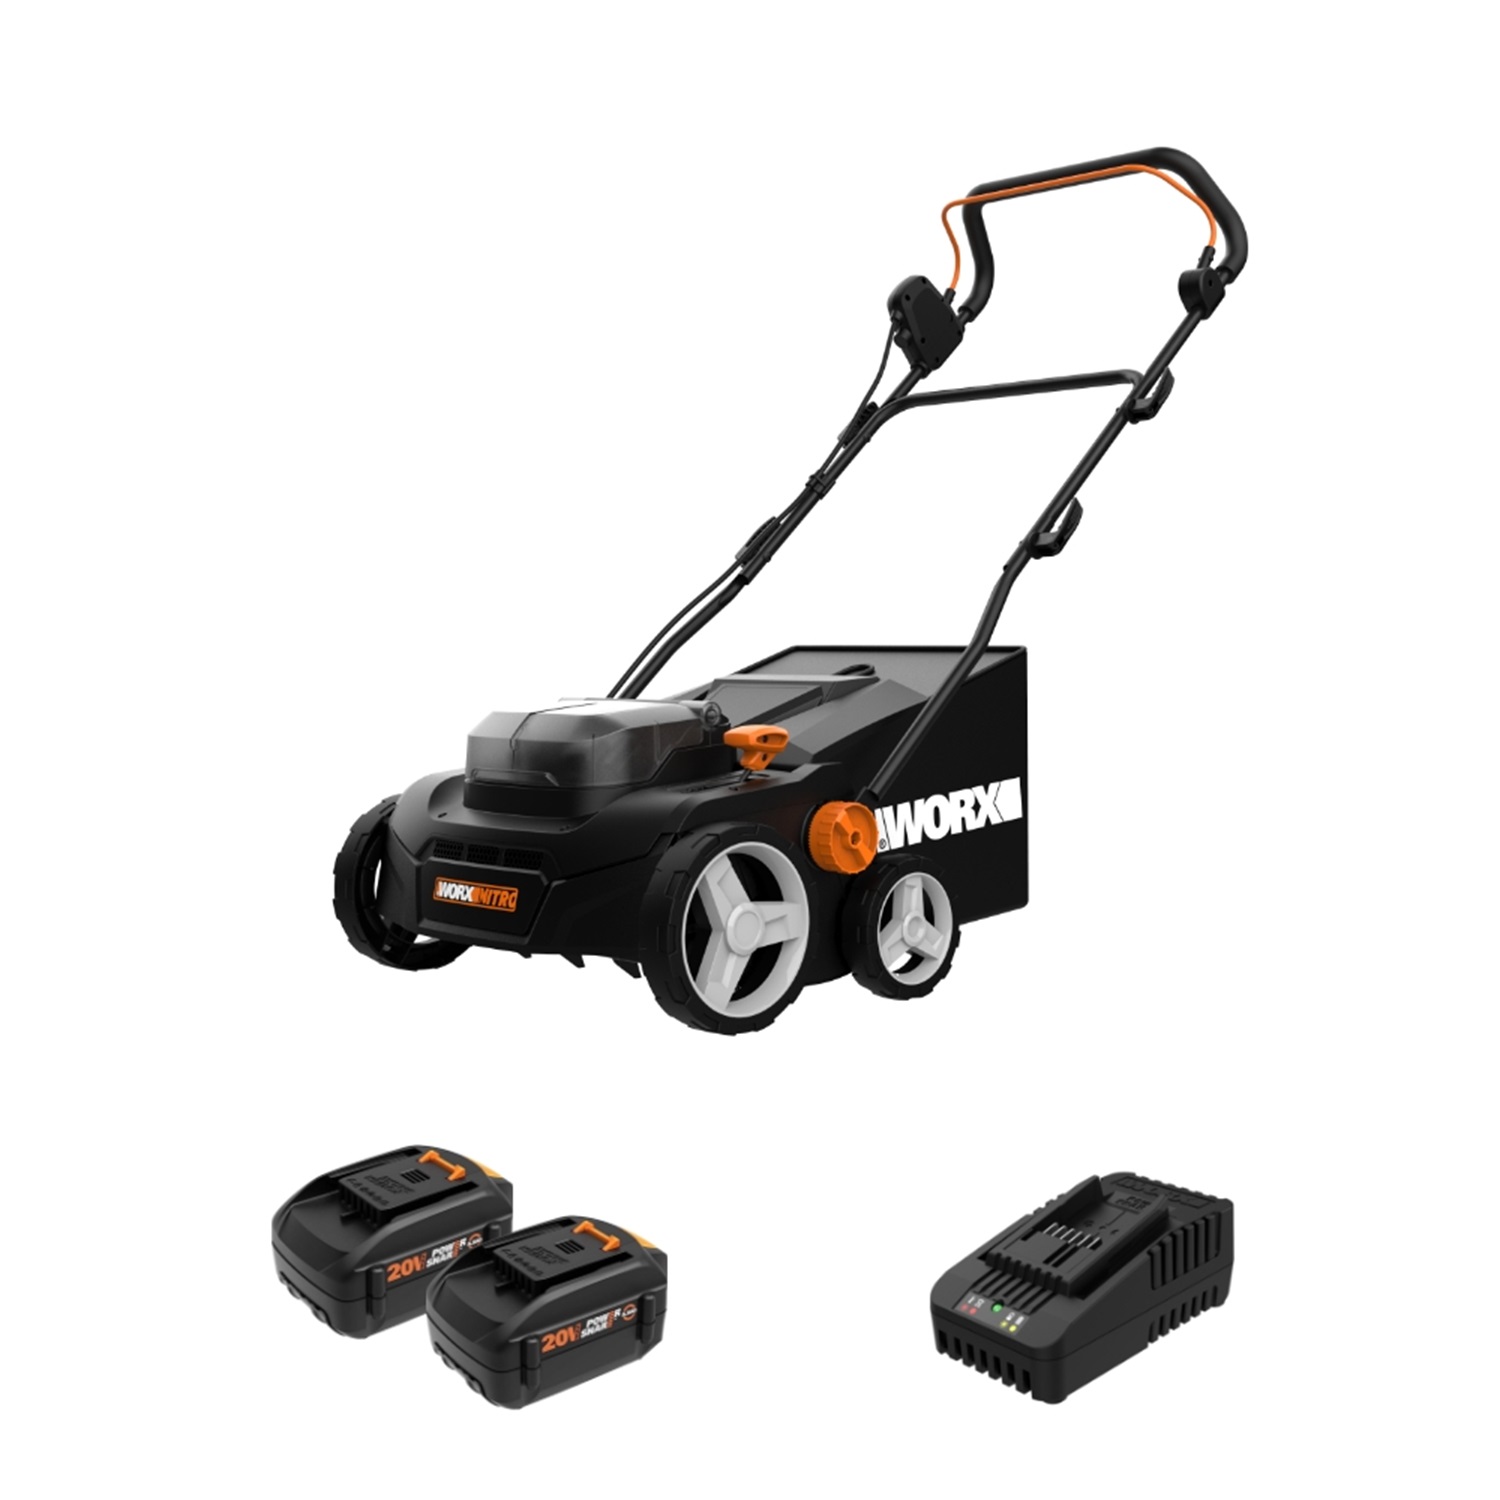 WORX WG850 14 Inch Corded Electric Dethatcher Review - Legit Reviews